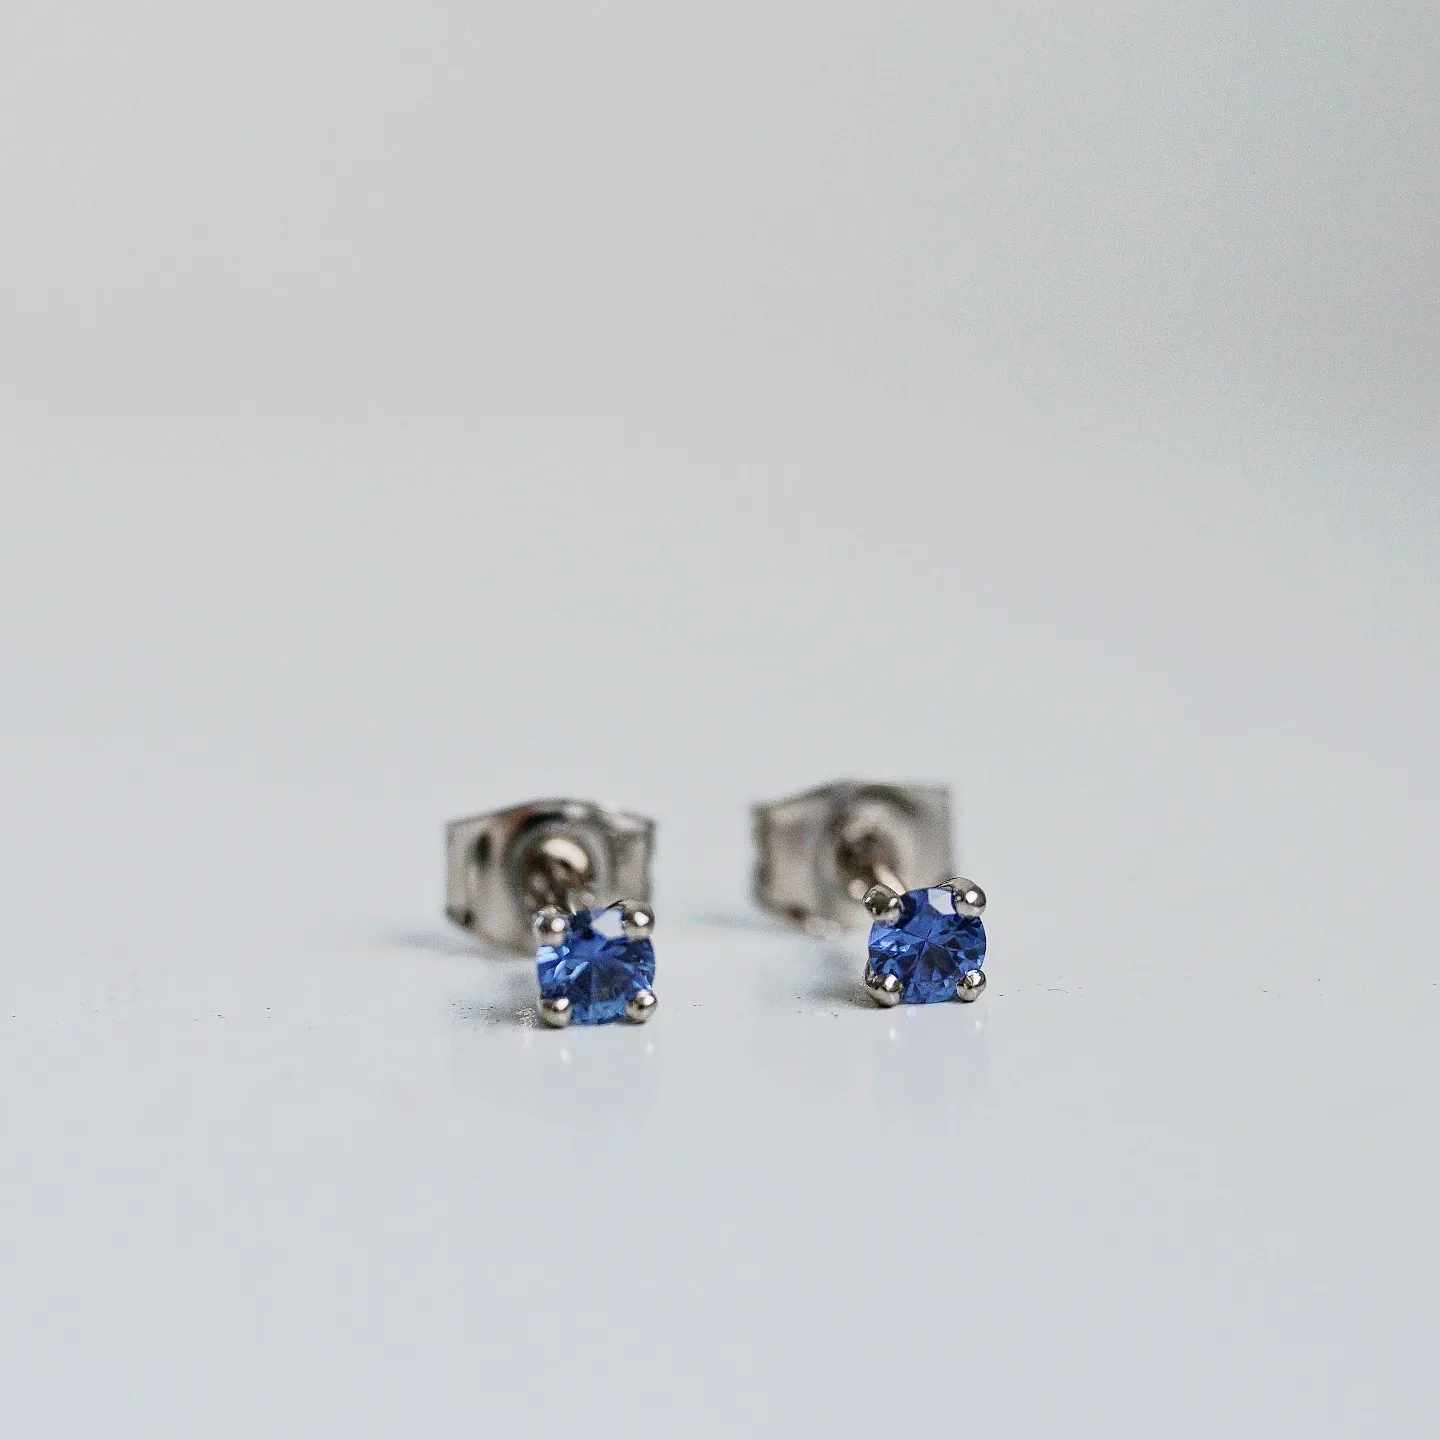 "Stellar" earstuds in white gold with blue sapphires